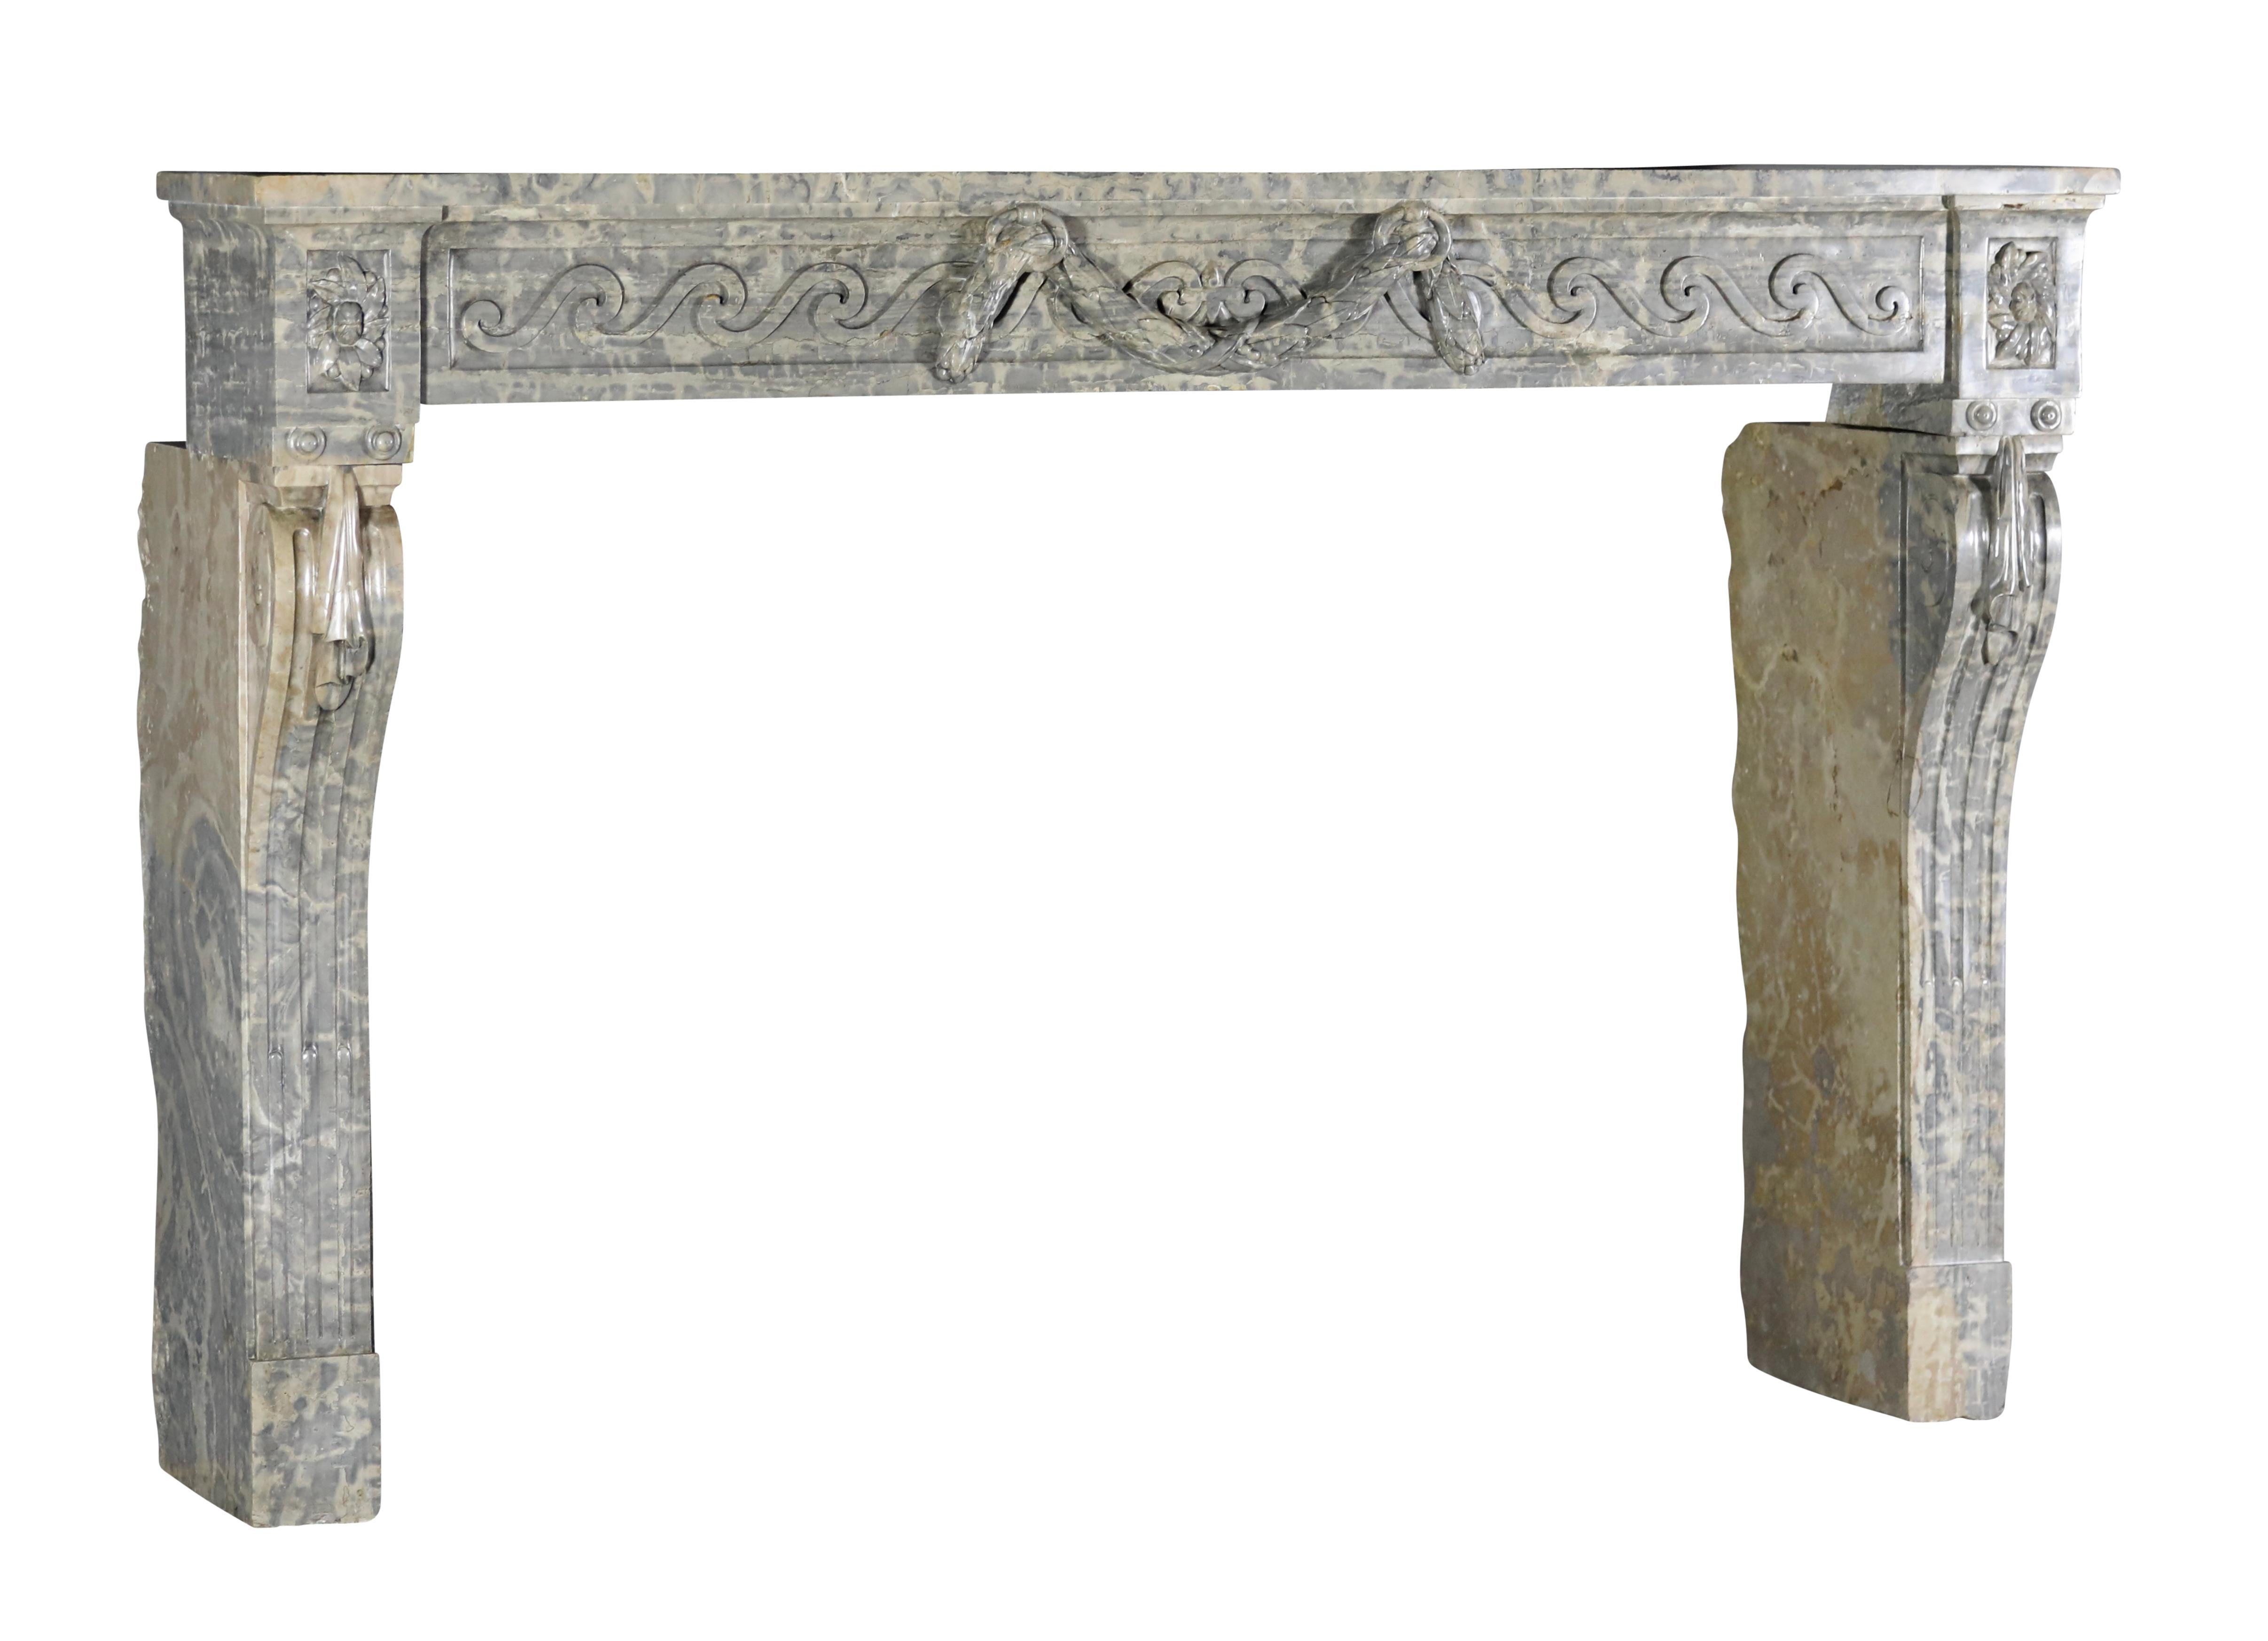 Exceptionally grand 18th century period fireplace surround.
The structure of this stone out of the French Ardêche area is so special that it is fit for a high-end interior design.
This piece speaks for itself.
Measurements:
180 cm Exterior Width